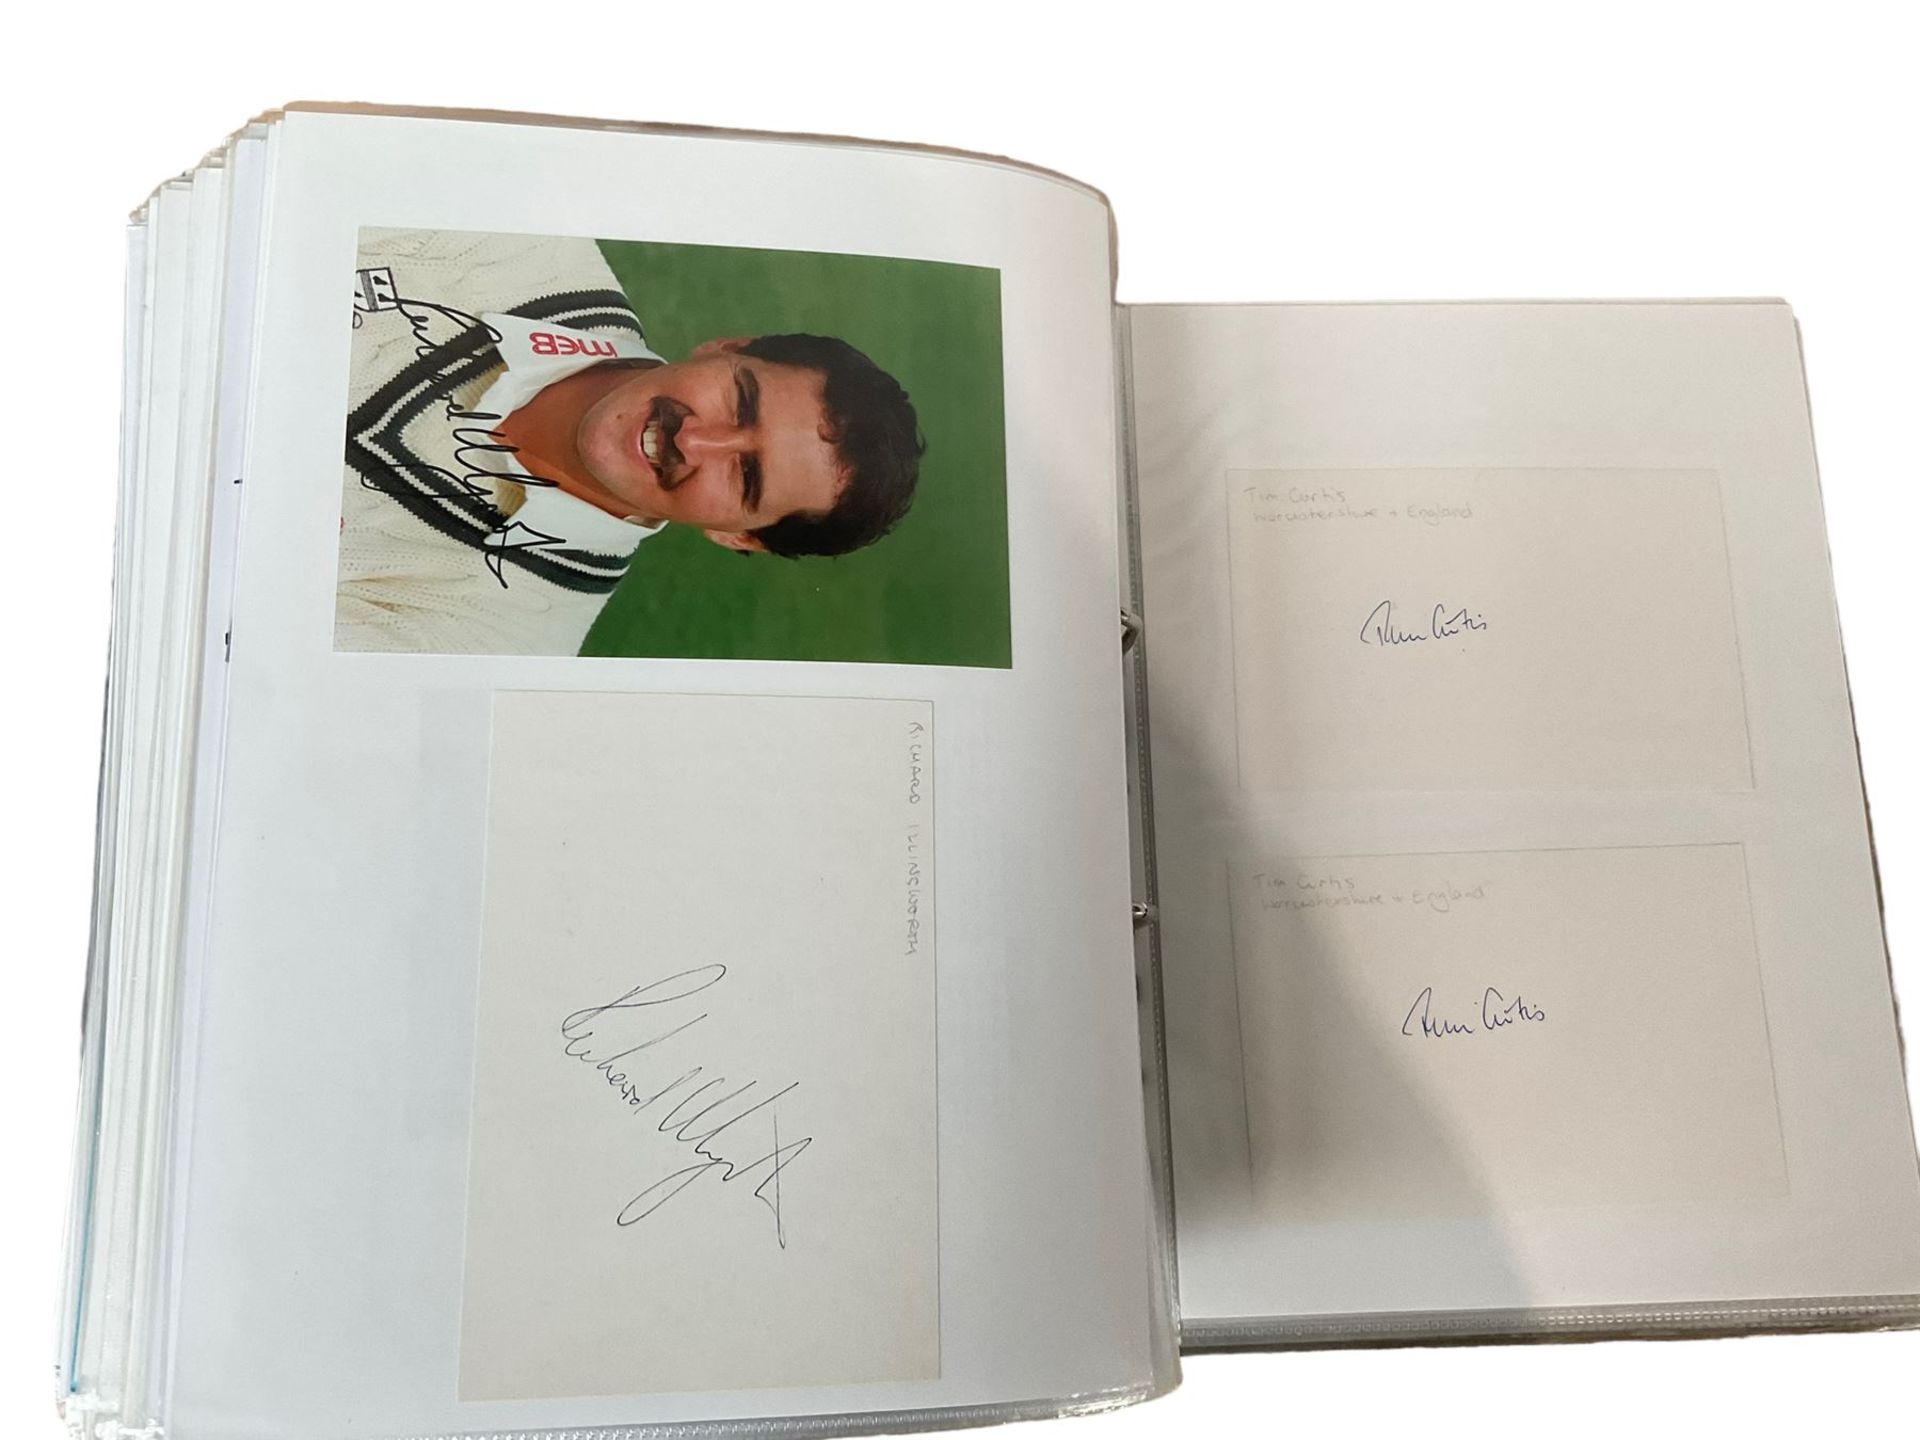 County Cricket - various autographs and signatures including Allan Lamb - Image 9 of 10